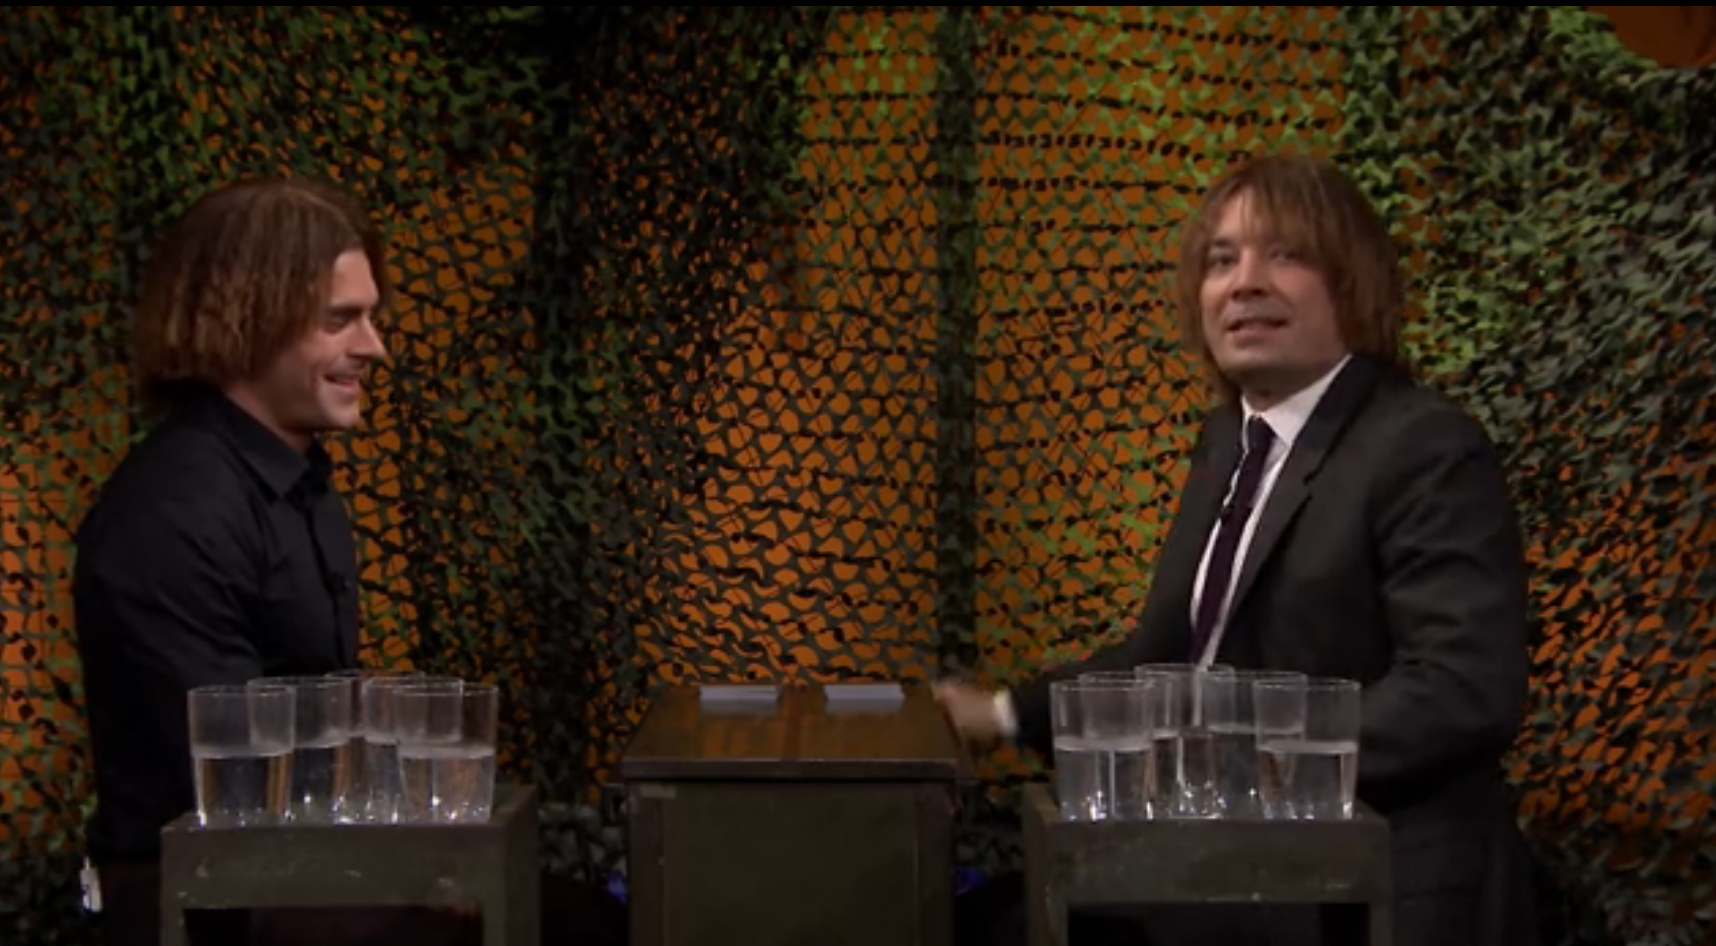 Jimmy and Zac Efron face off in a twist on the card game War, where the loser of each hand faces wet consequences on The Tonight Show Starring Jimmy Fallon on May 18, 2016.